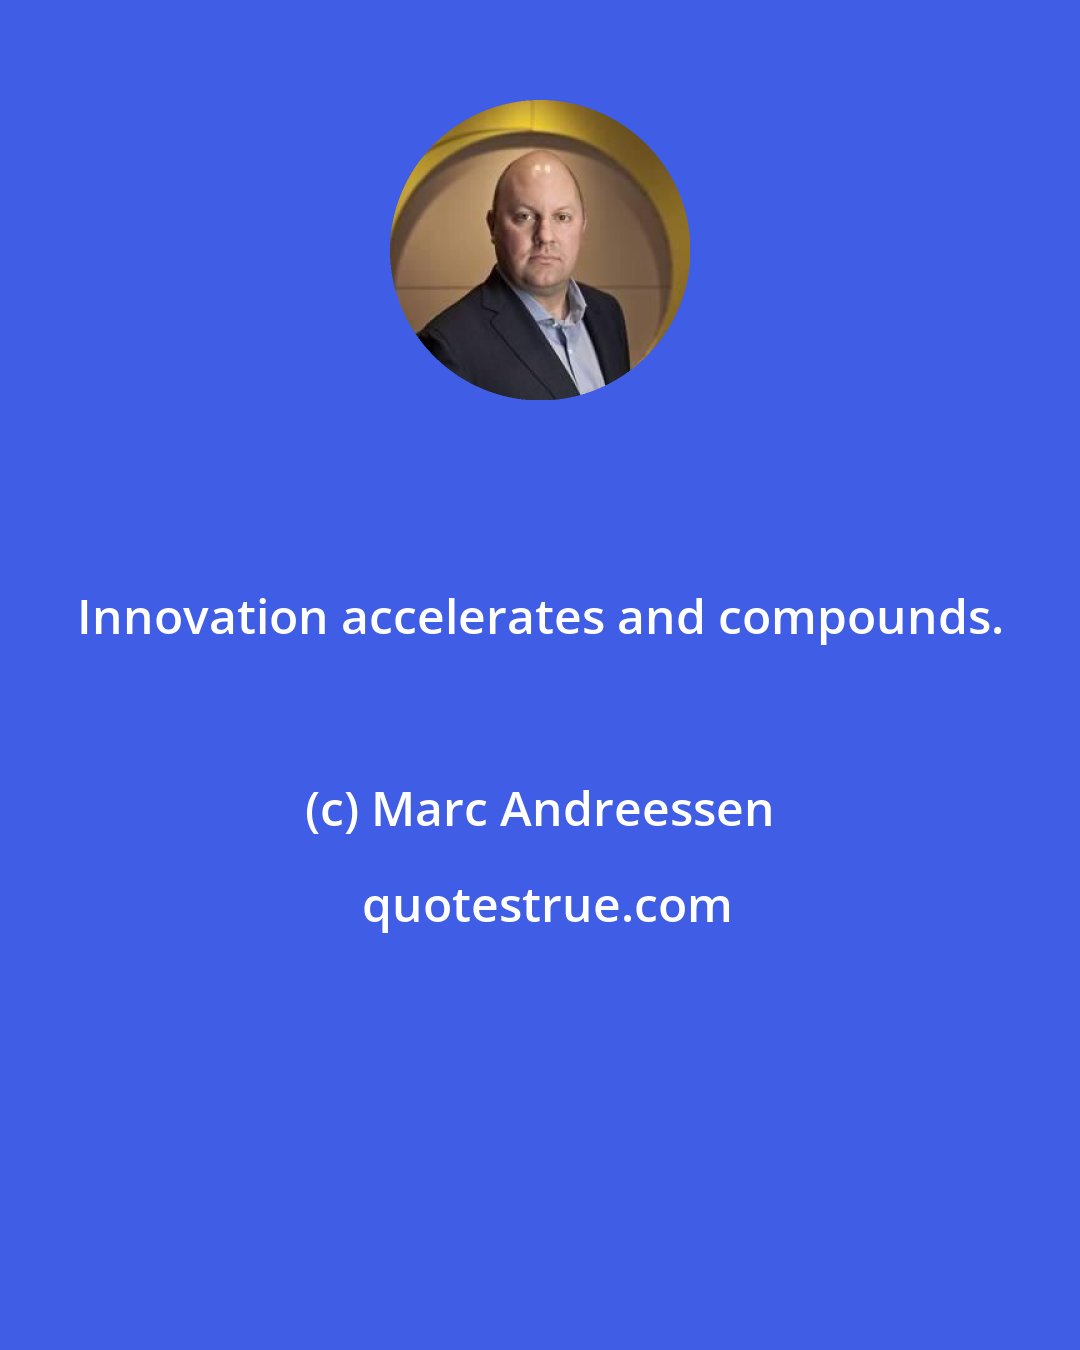 Marc Andreessen: Innovation accelerates and compounds.